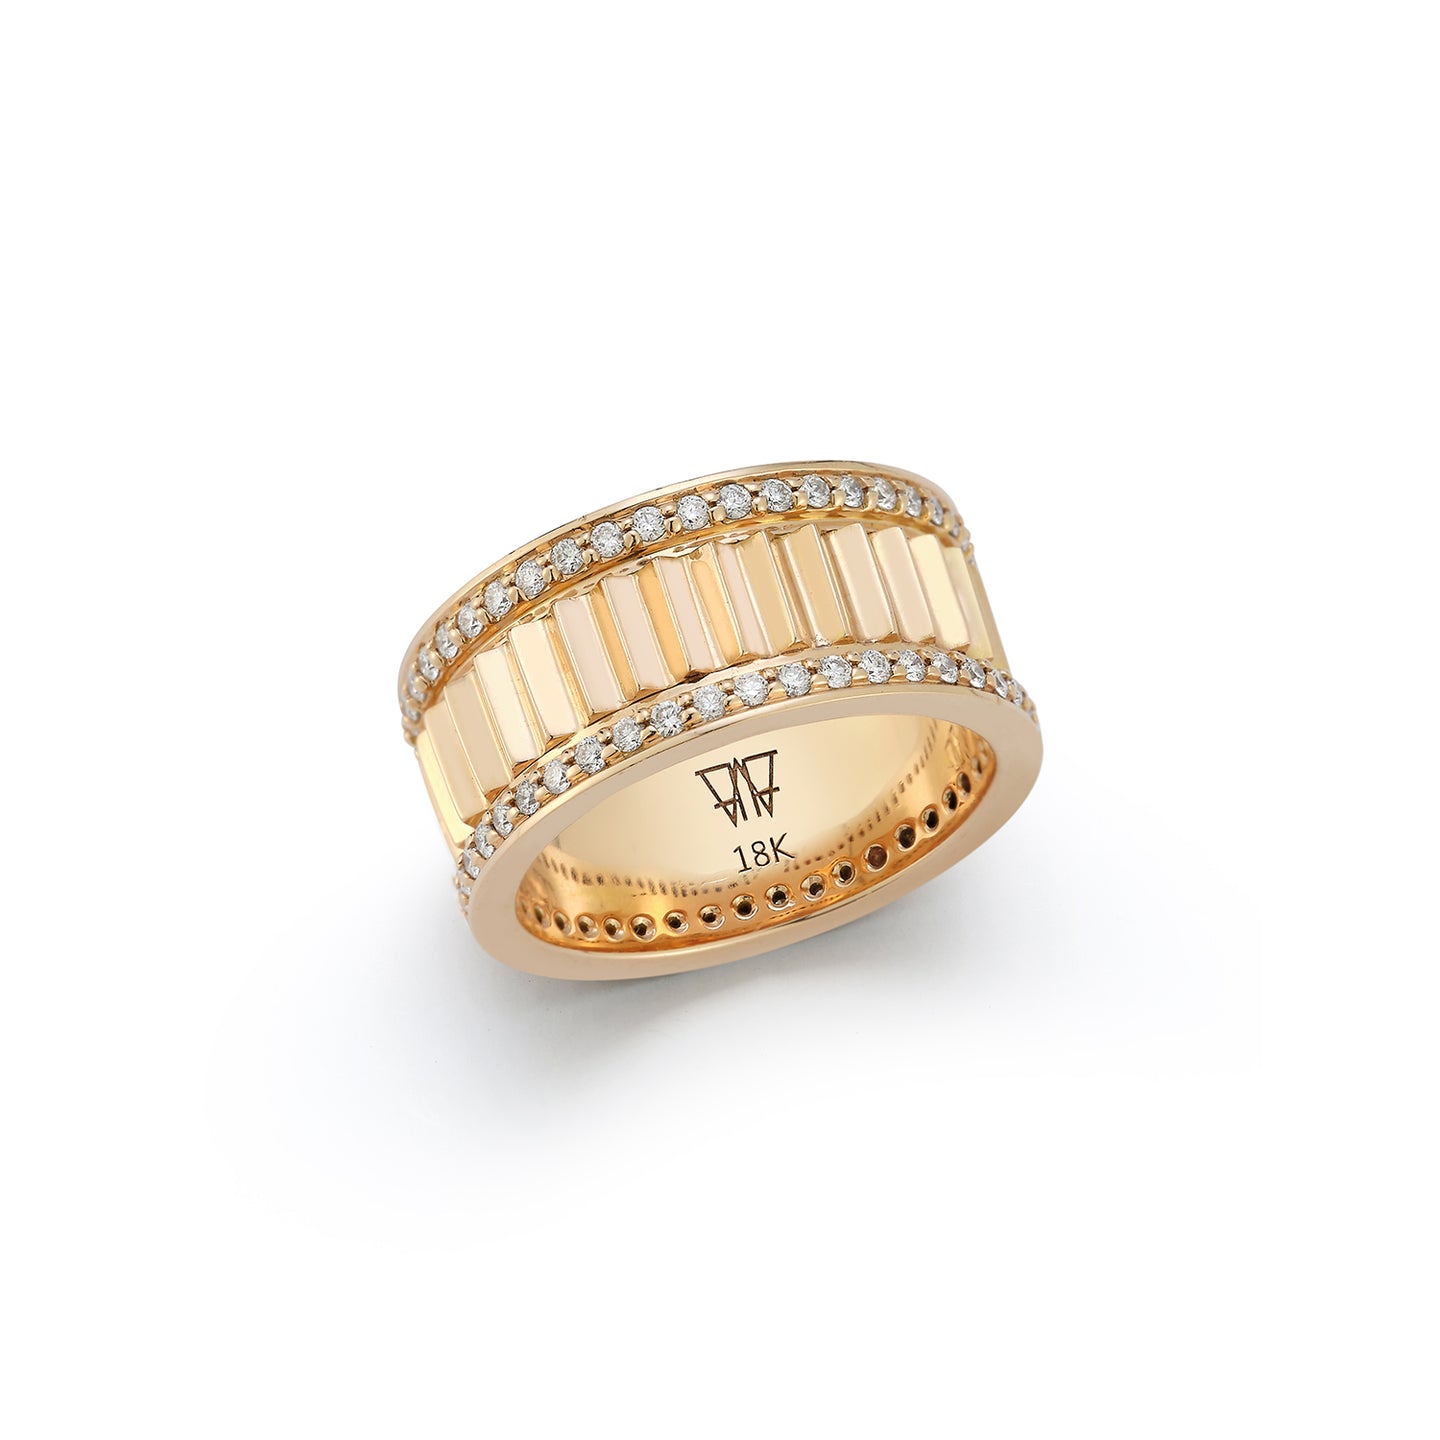 CLIVE 18K GOLD & DIAMOND 10MM FLUTED BAND RING